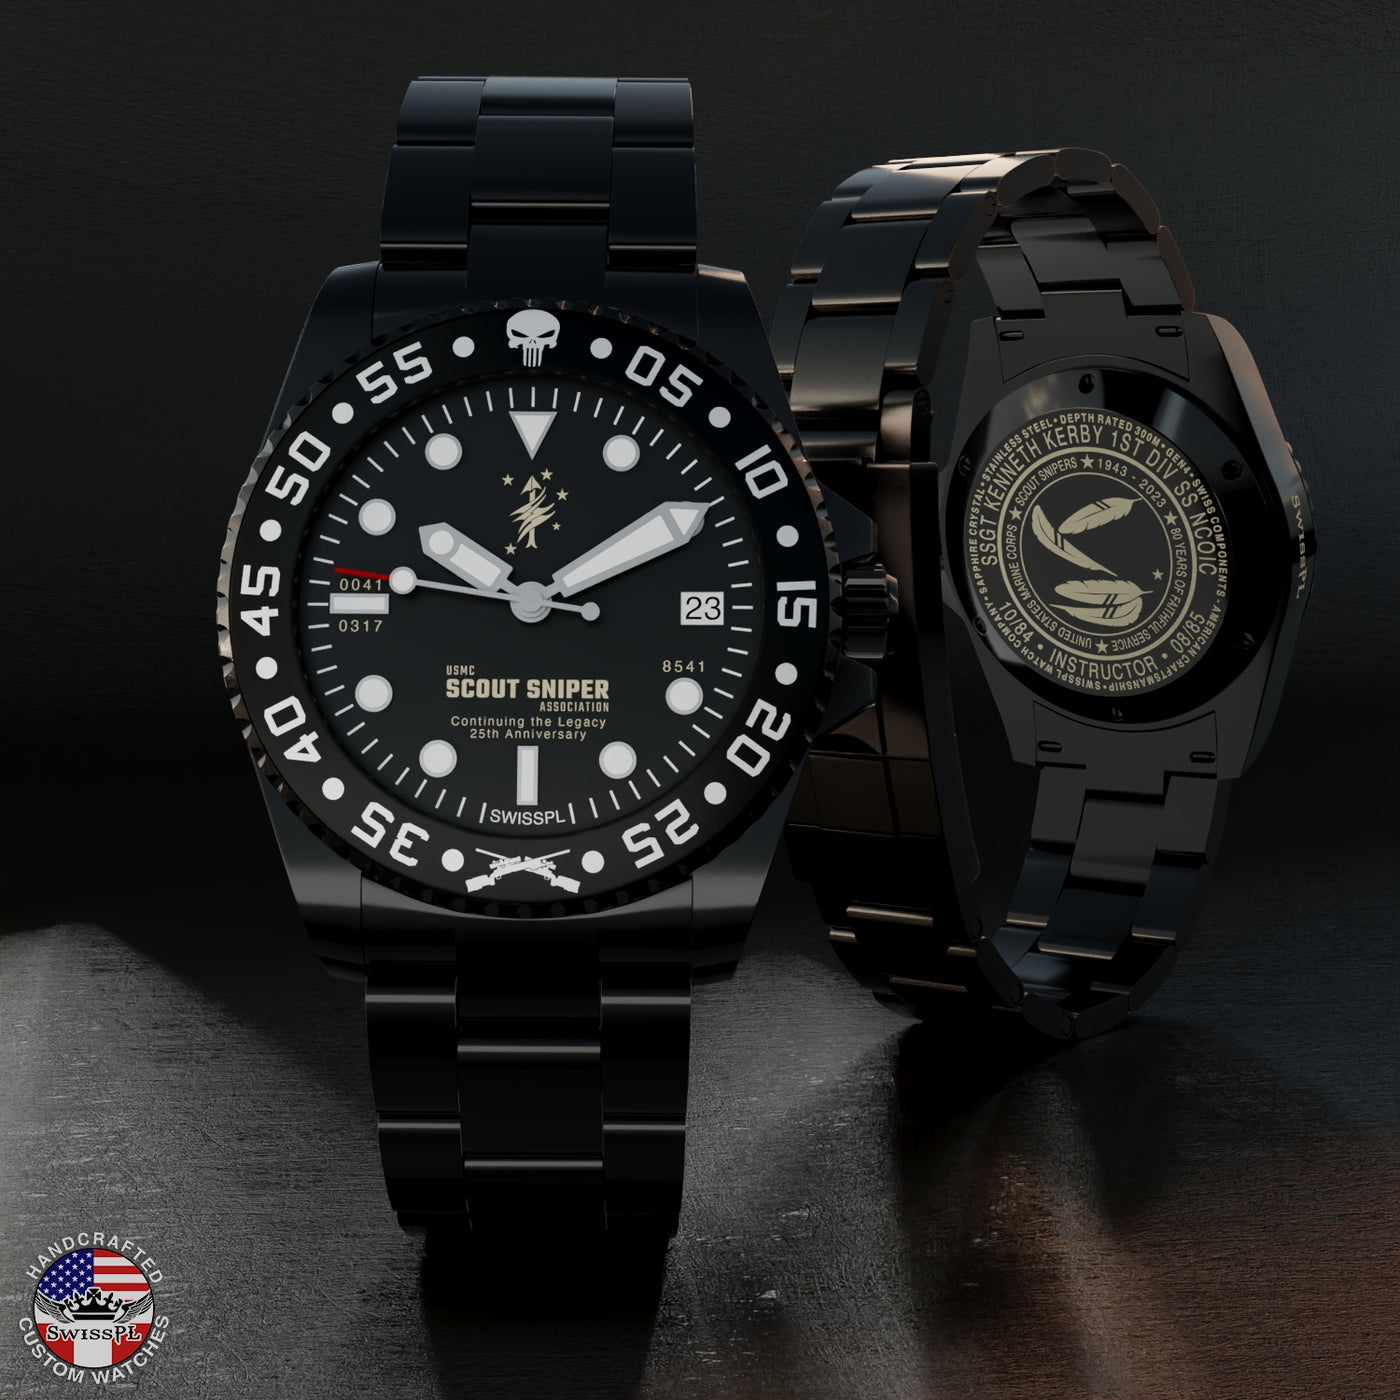 Exclusive Tribute: limited edition USMC Scout Sniper watches.